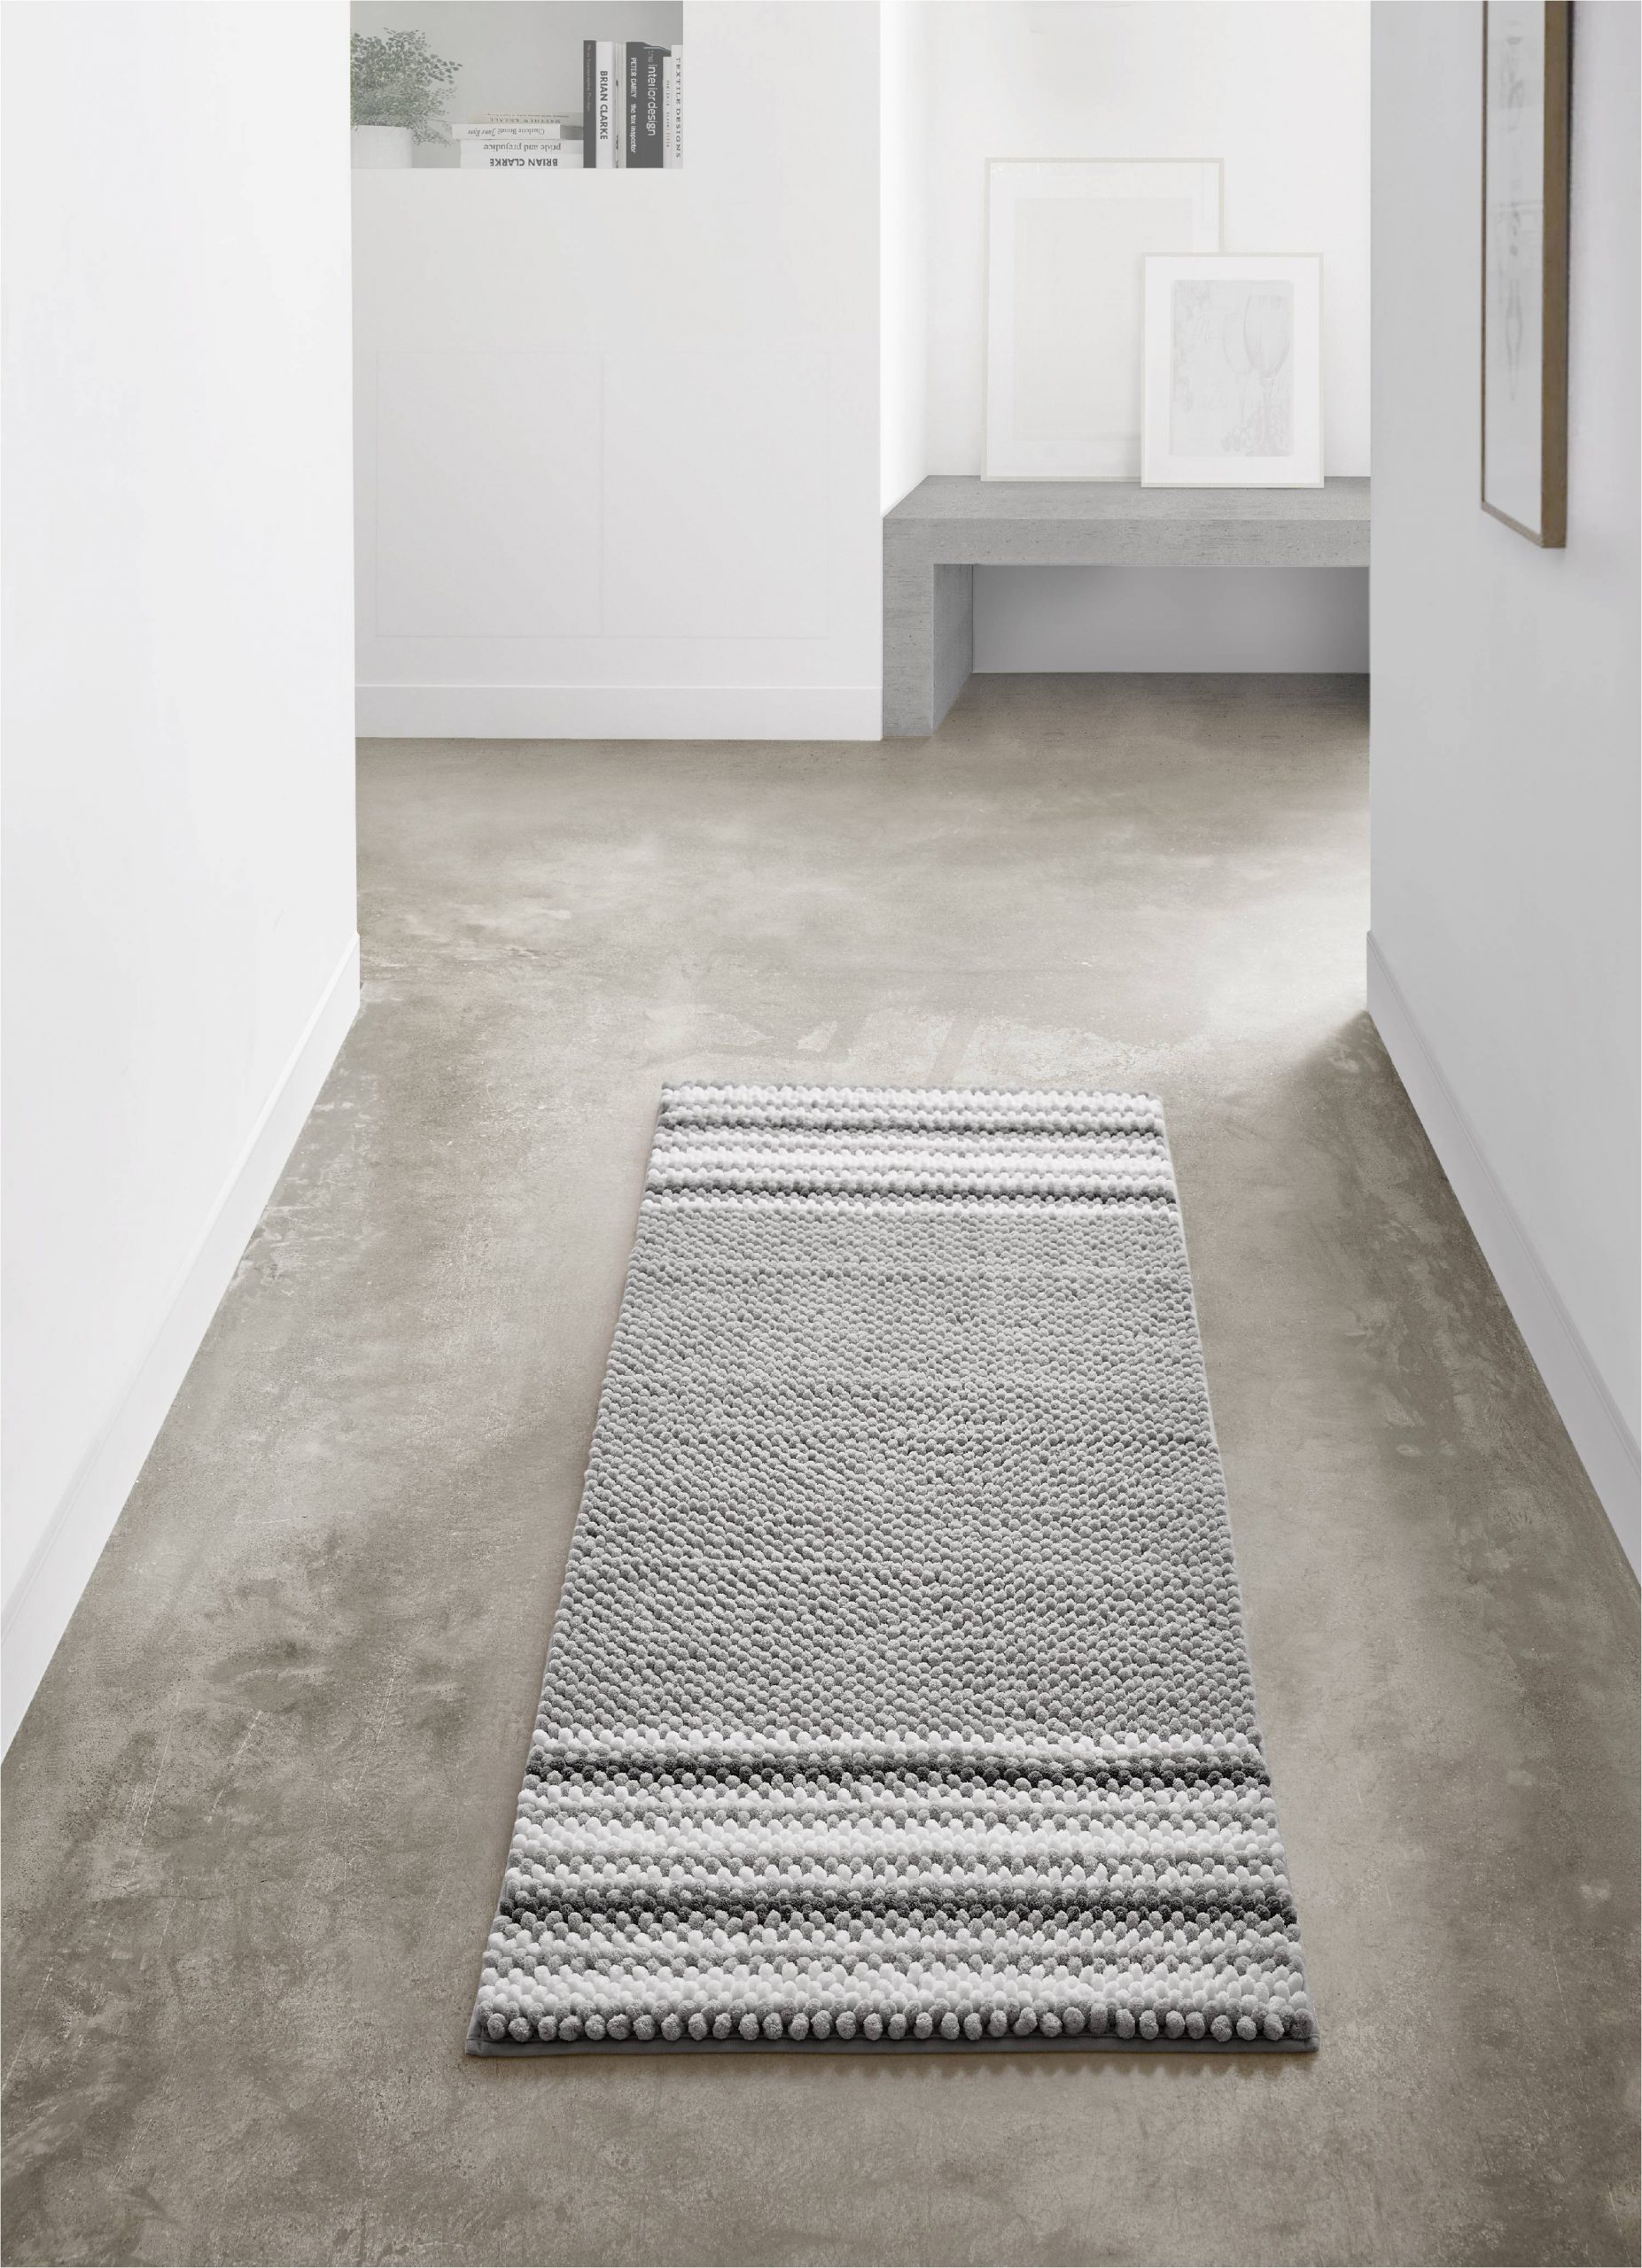 Bathroom Runner Rug Gray Vcny Home Aiden Jacquard Chenille Noodle Bath Runner 24 X 60 Taupe